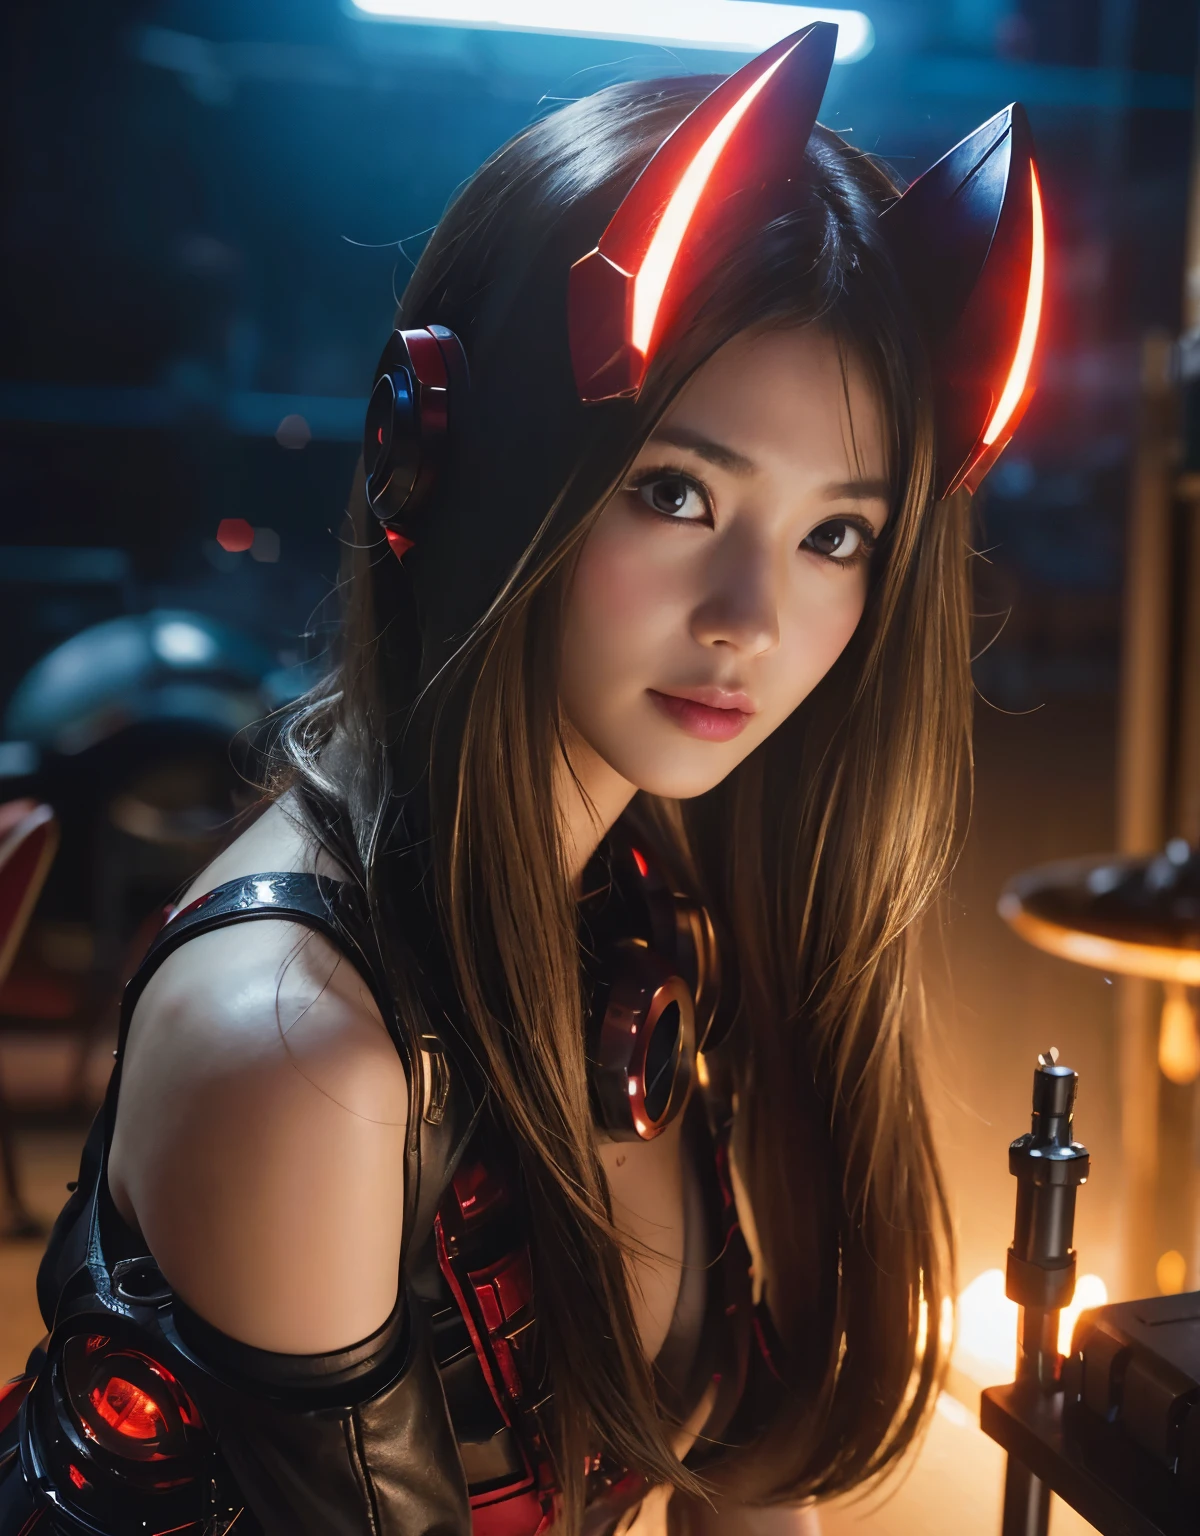 (Skimpy mechanical girl and alien background)、（Mystical expression）、top-quality、​masterpiece、超A high resolution、(Photorealsitic:1.4)、Raw photo、1 girl、glowy skin、(((1 Mechanical Girl)))、（red metalボディスーツ）、(Natural alien background to fight aliens)、(Small LED)、((super realistic details))、vertical giant monster background),globalillumination、Shadow、octan render、8K、ultrasharp、equipment people background、Colossal 、Raw skin exposed in the cleavage、red metal、Details of complex ornaments、Japan details、highly intricate detail、Realistic light、(Mystical expression),CG Society Trenlow Eyes、Eyes shining towards the camera、Mechanical marginal blood vessels connected to neon detail tubes)、(Wires and cables connecting to the head)、Small LED、,Mechanical thighs、Toostock、（Hands are also made of machines）、、future alien、Please wear a mechanical helmet、